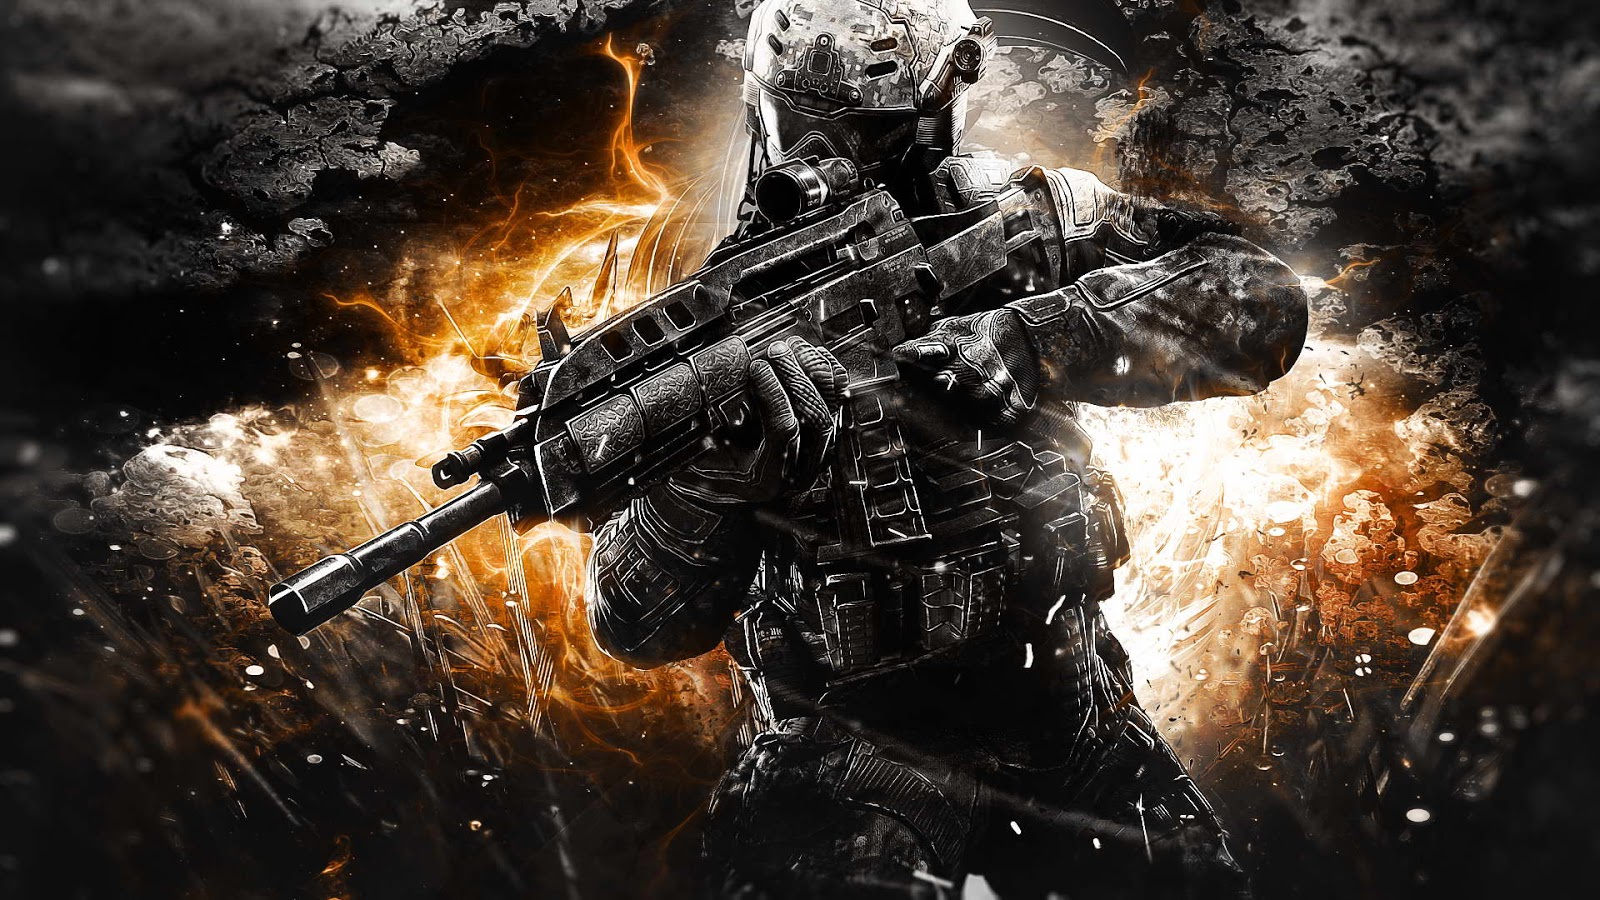 Call Of Duty Zombies Wallpapercod Black Ops Zombies